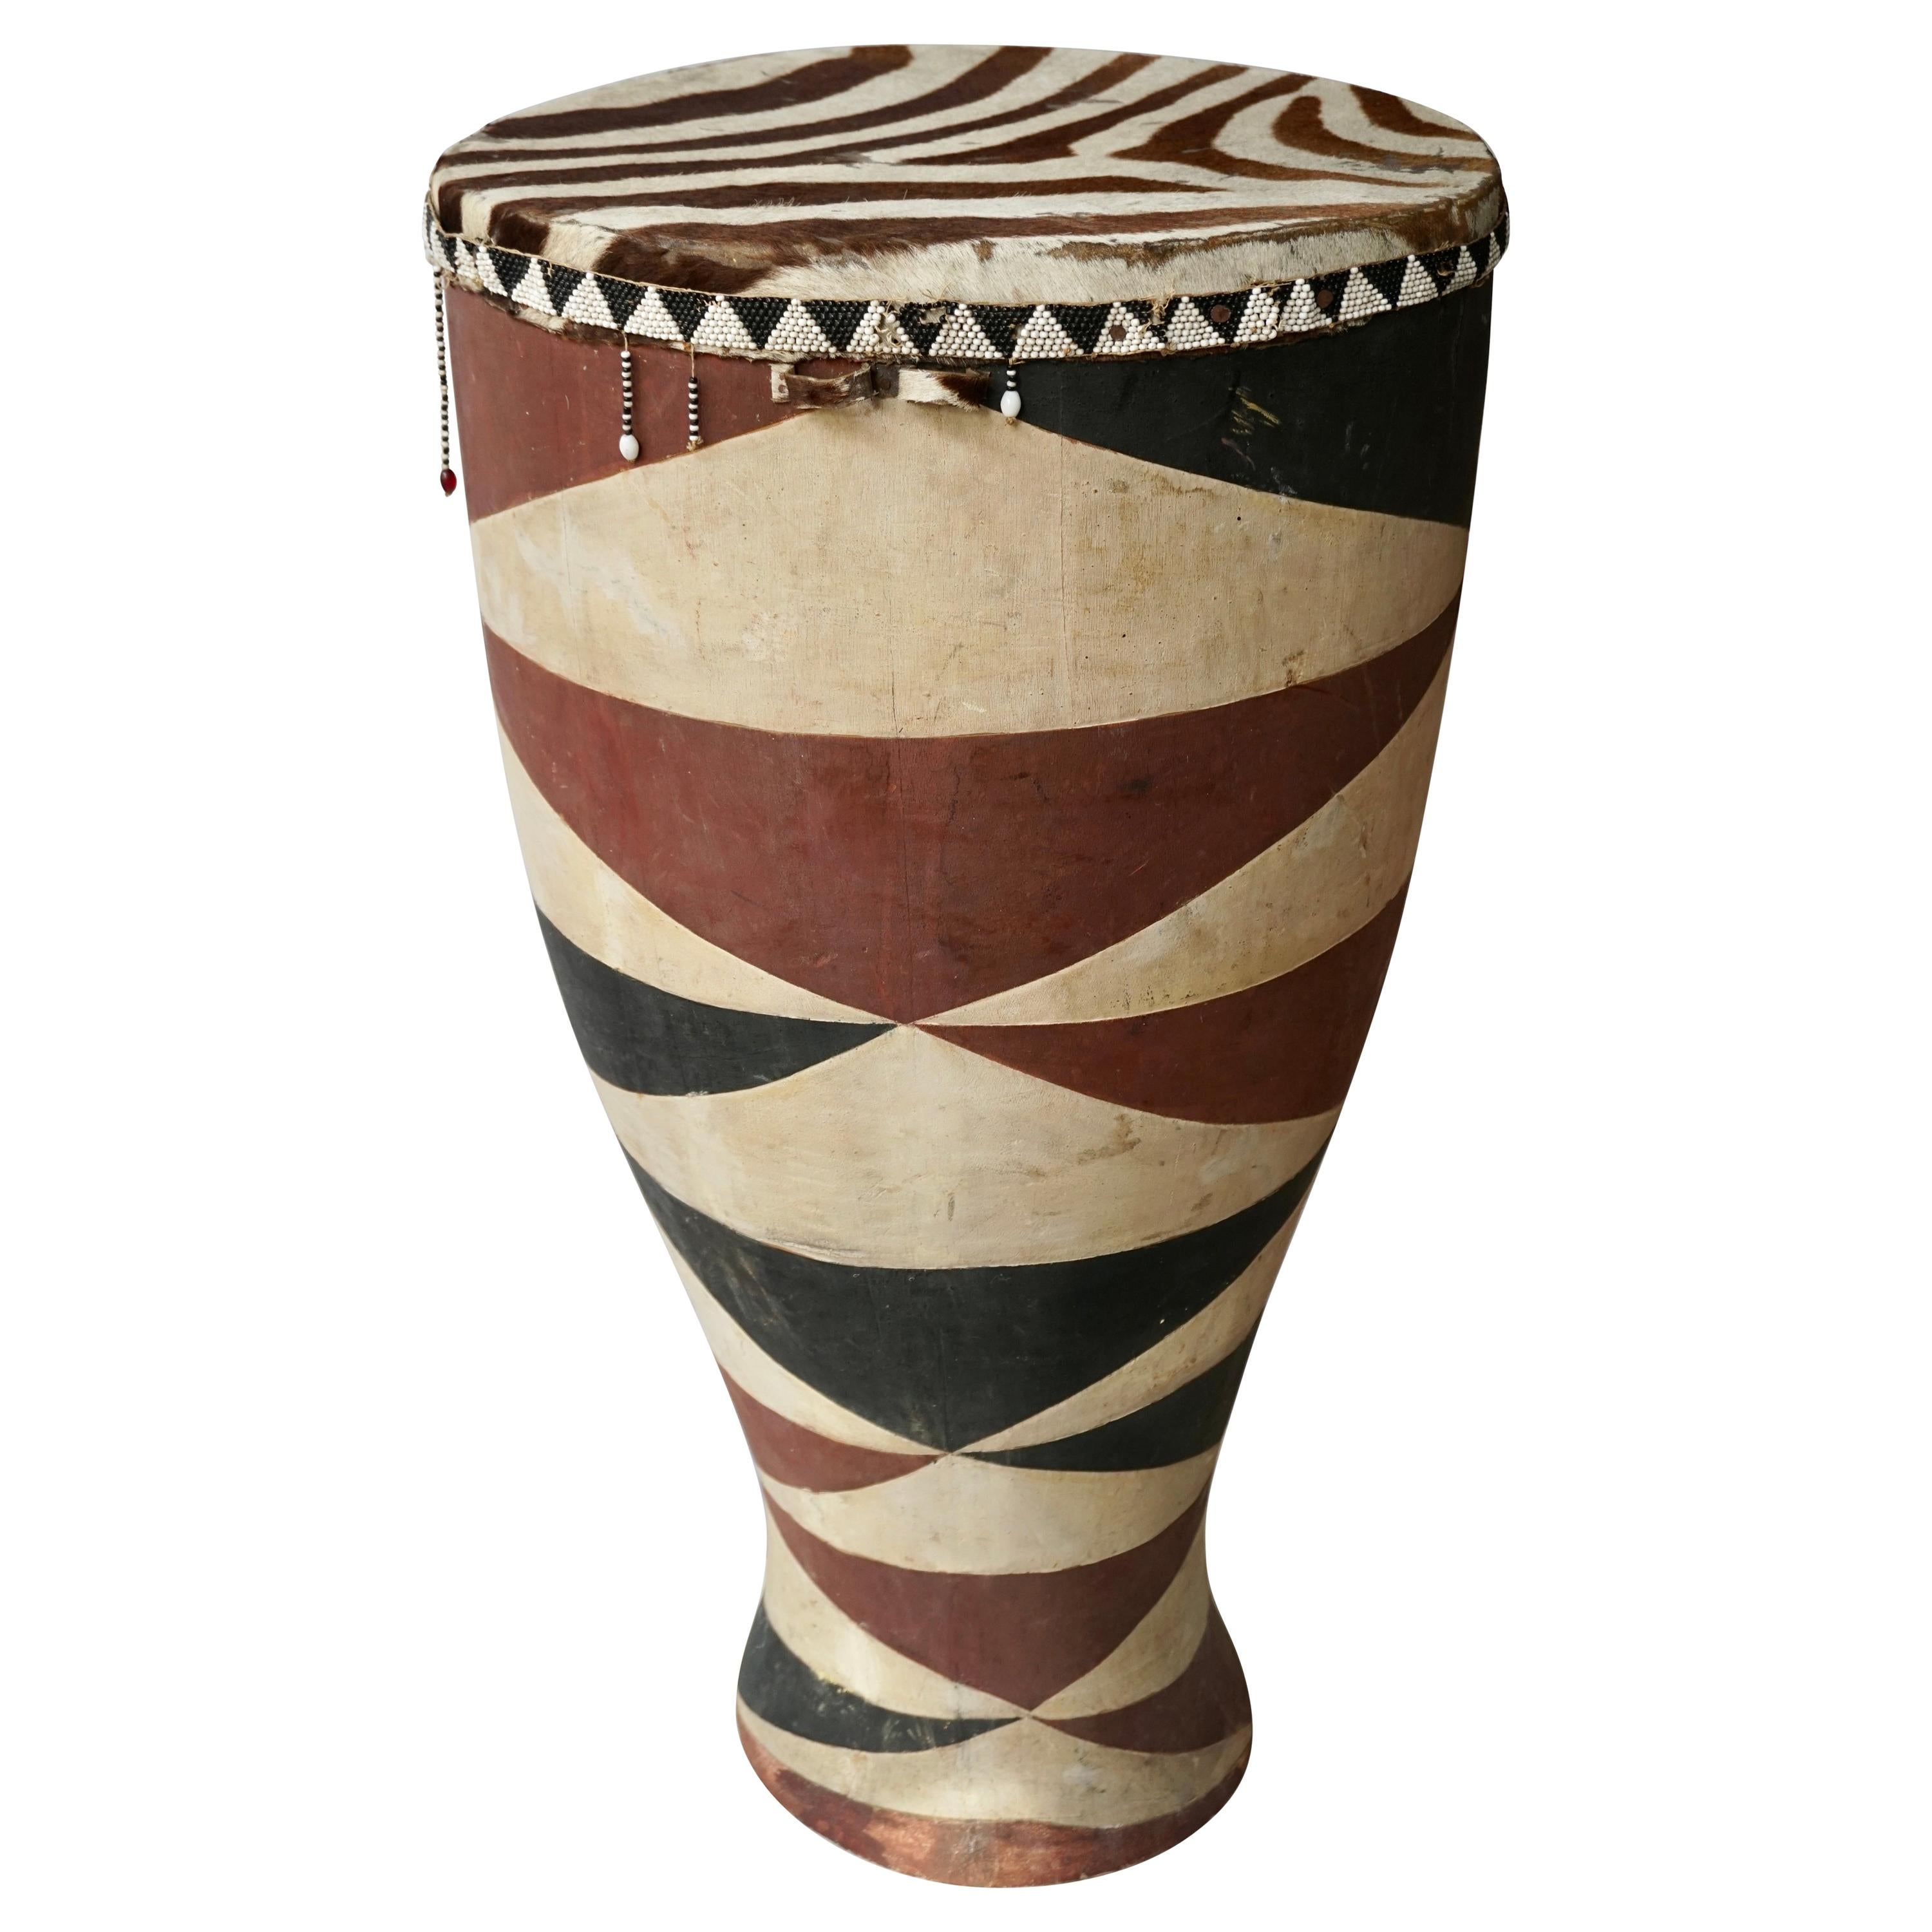 African Tribal Painted Hide Drum Table with Zebra Covering from Congo